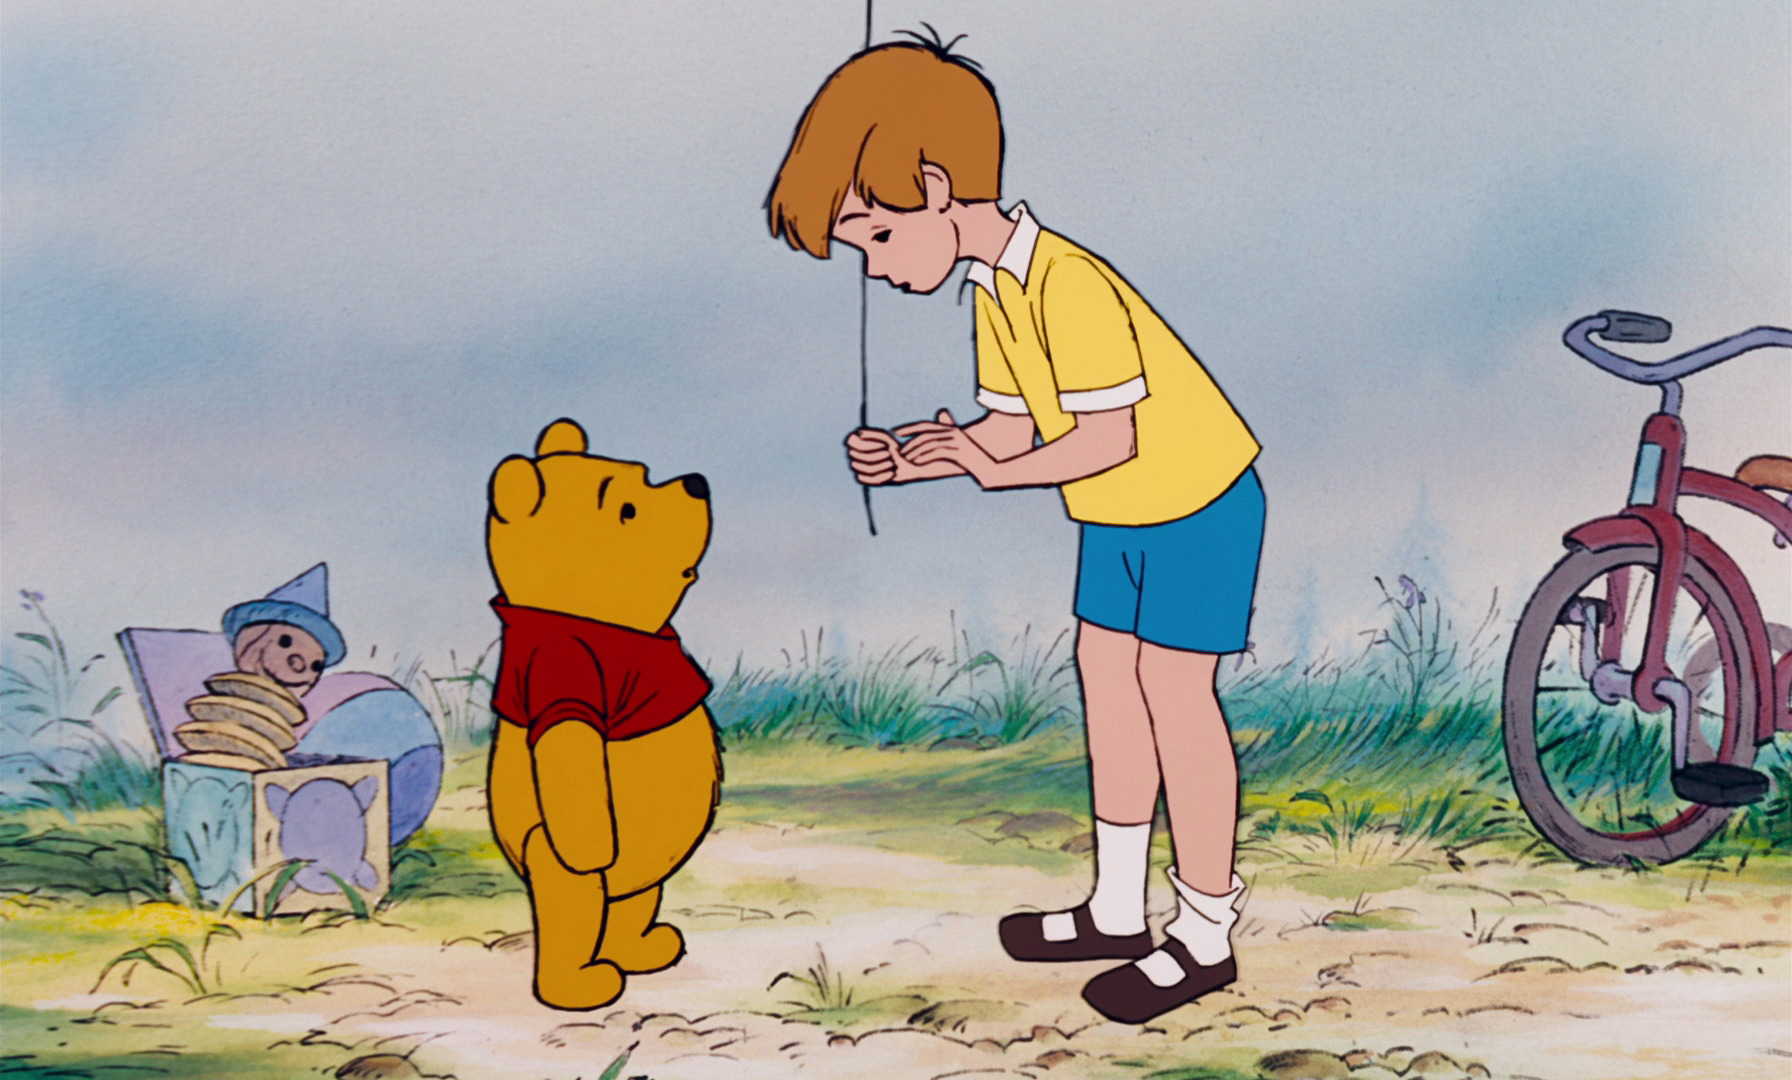 Ewan McGregor is in talks to star as Christopher Robin in Disney’s Live Action Winnie the Pooh Movie